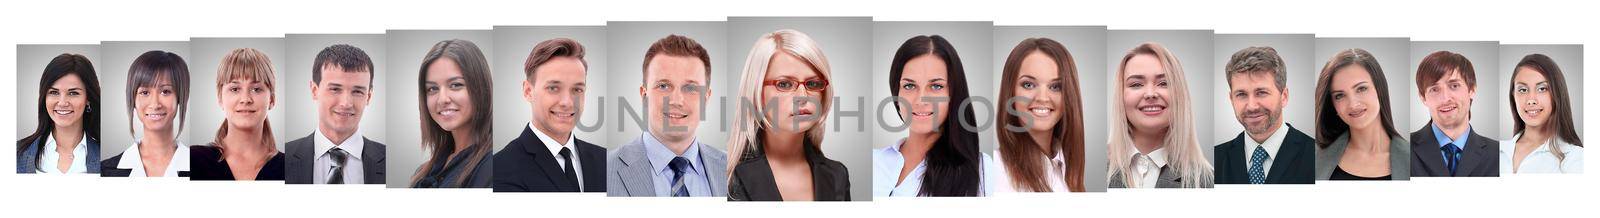 panoramic collage of portraits of successful business people. business concept